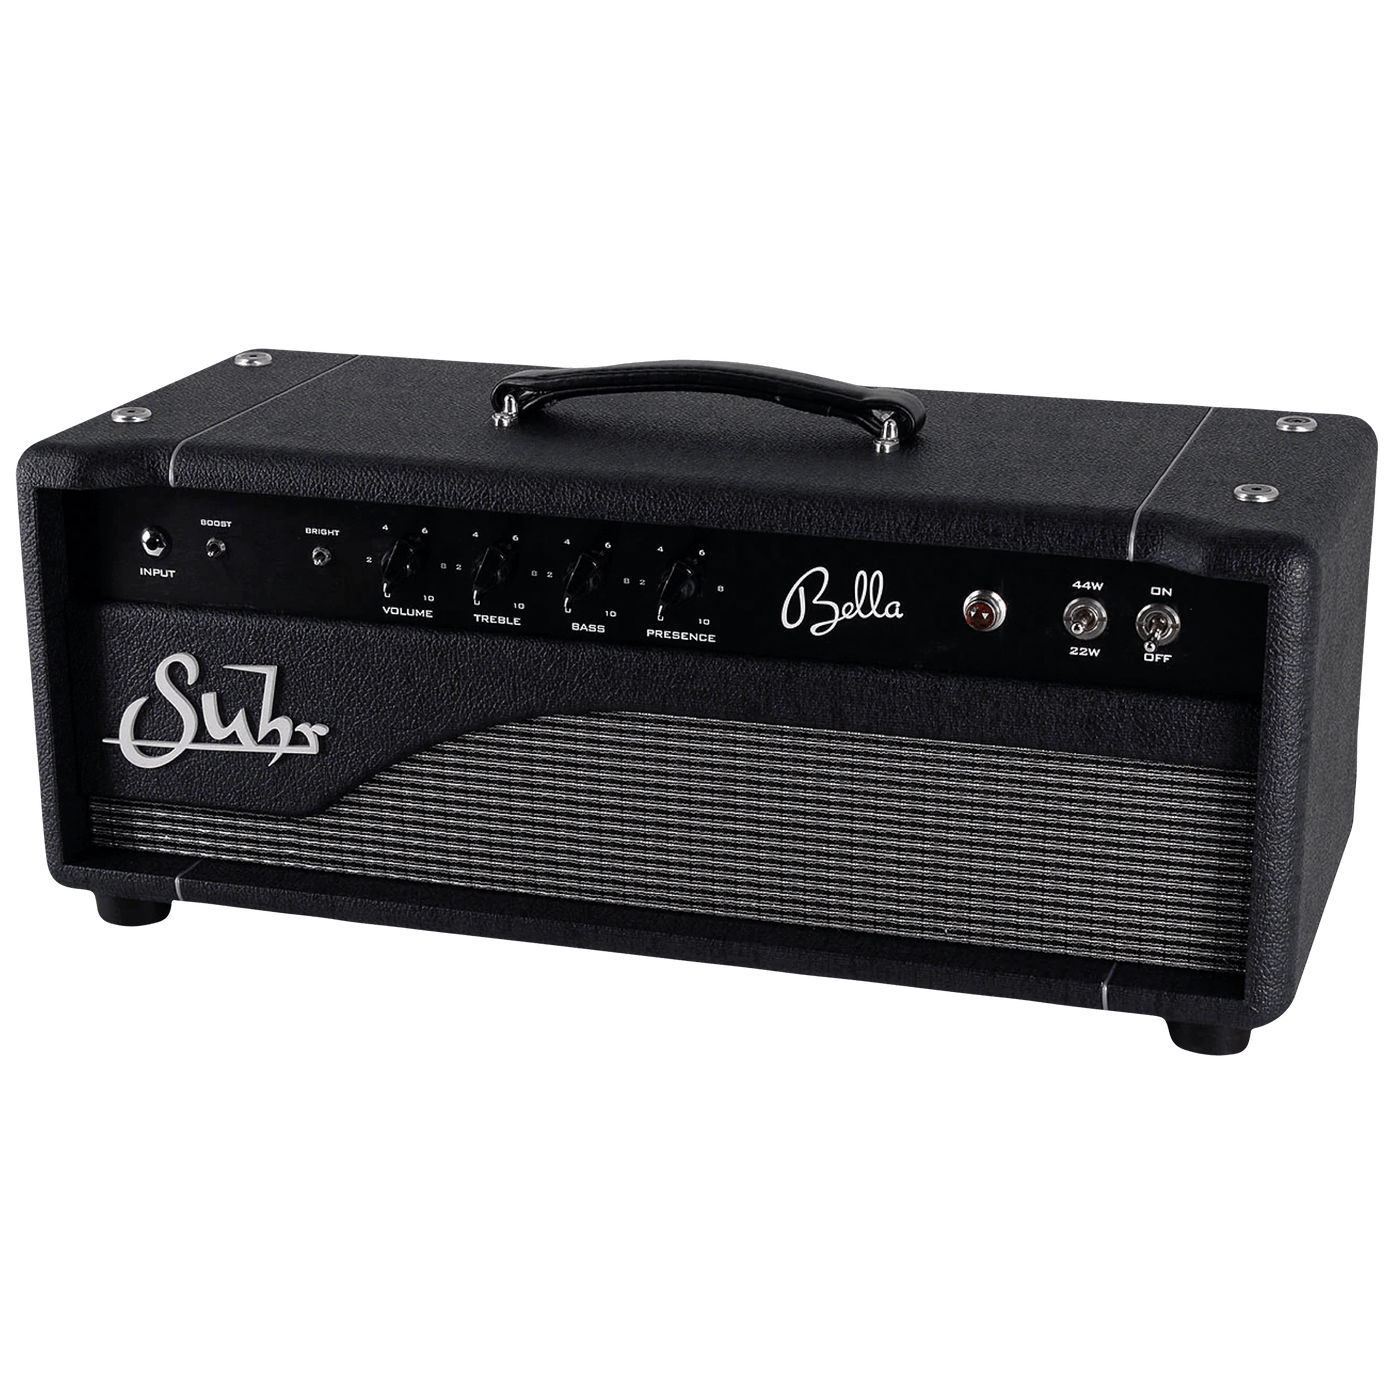 Suhr Bella Head - $1999990 - Gearhub - Bella is a portable, American voiced, hand-wired, all-tube amplifier, designed to be the ideal grab-n-go amplifier and the ultimate platform for your pedalboard. Bella’s simple and easy to use controls (including Boost and 3-position Bright switch) make it a snap to tailor the amp to your favorite boost, overdrive, fuzz and distortion pedals; while the effects loop is the ideal place for all of your chorus, flange, delay, and reverb pedals.Bella is powered by a duet of